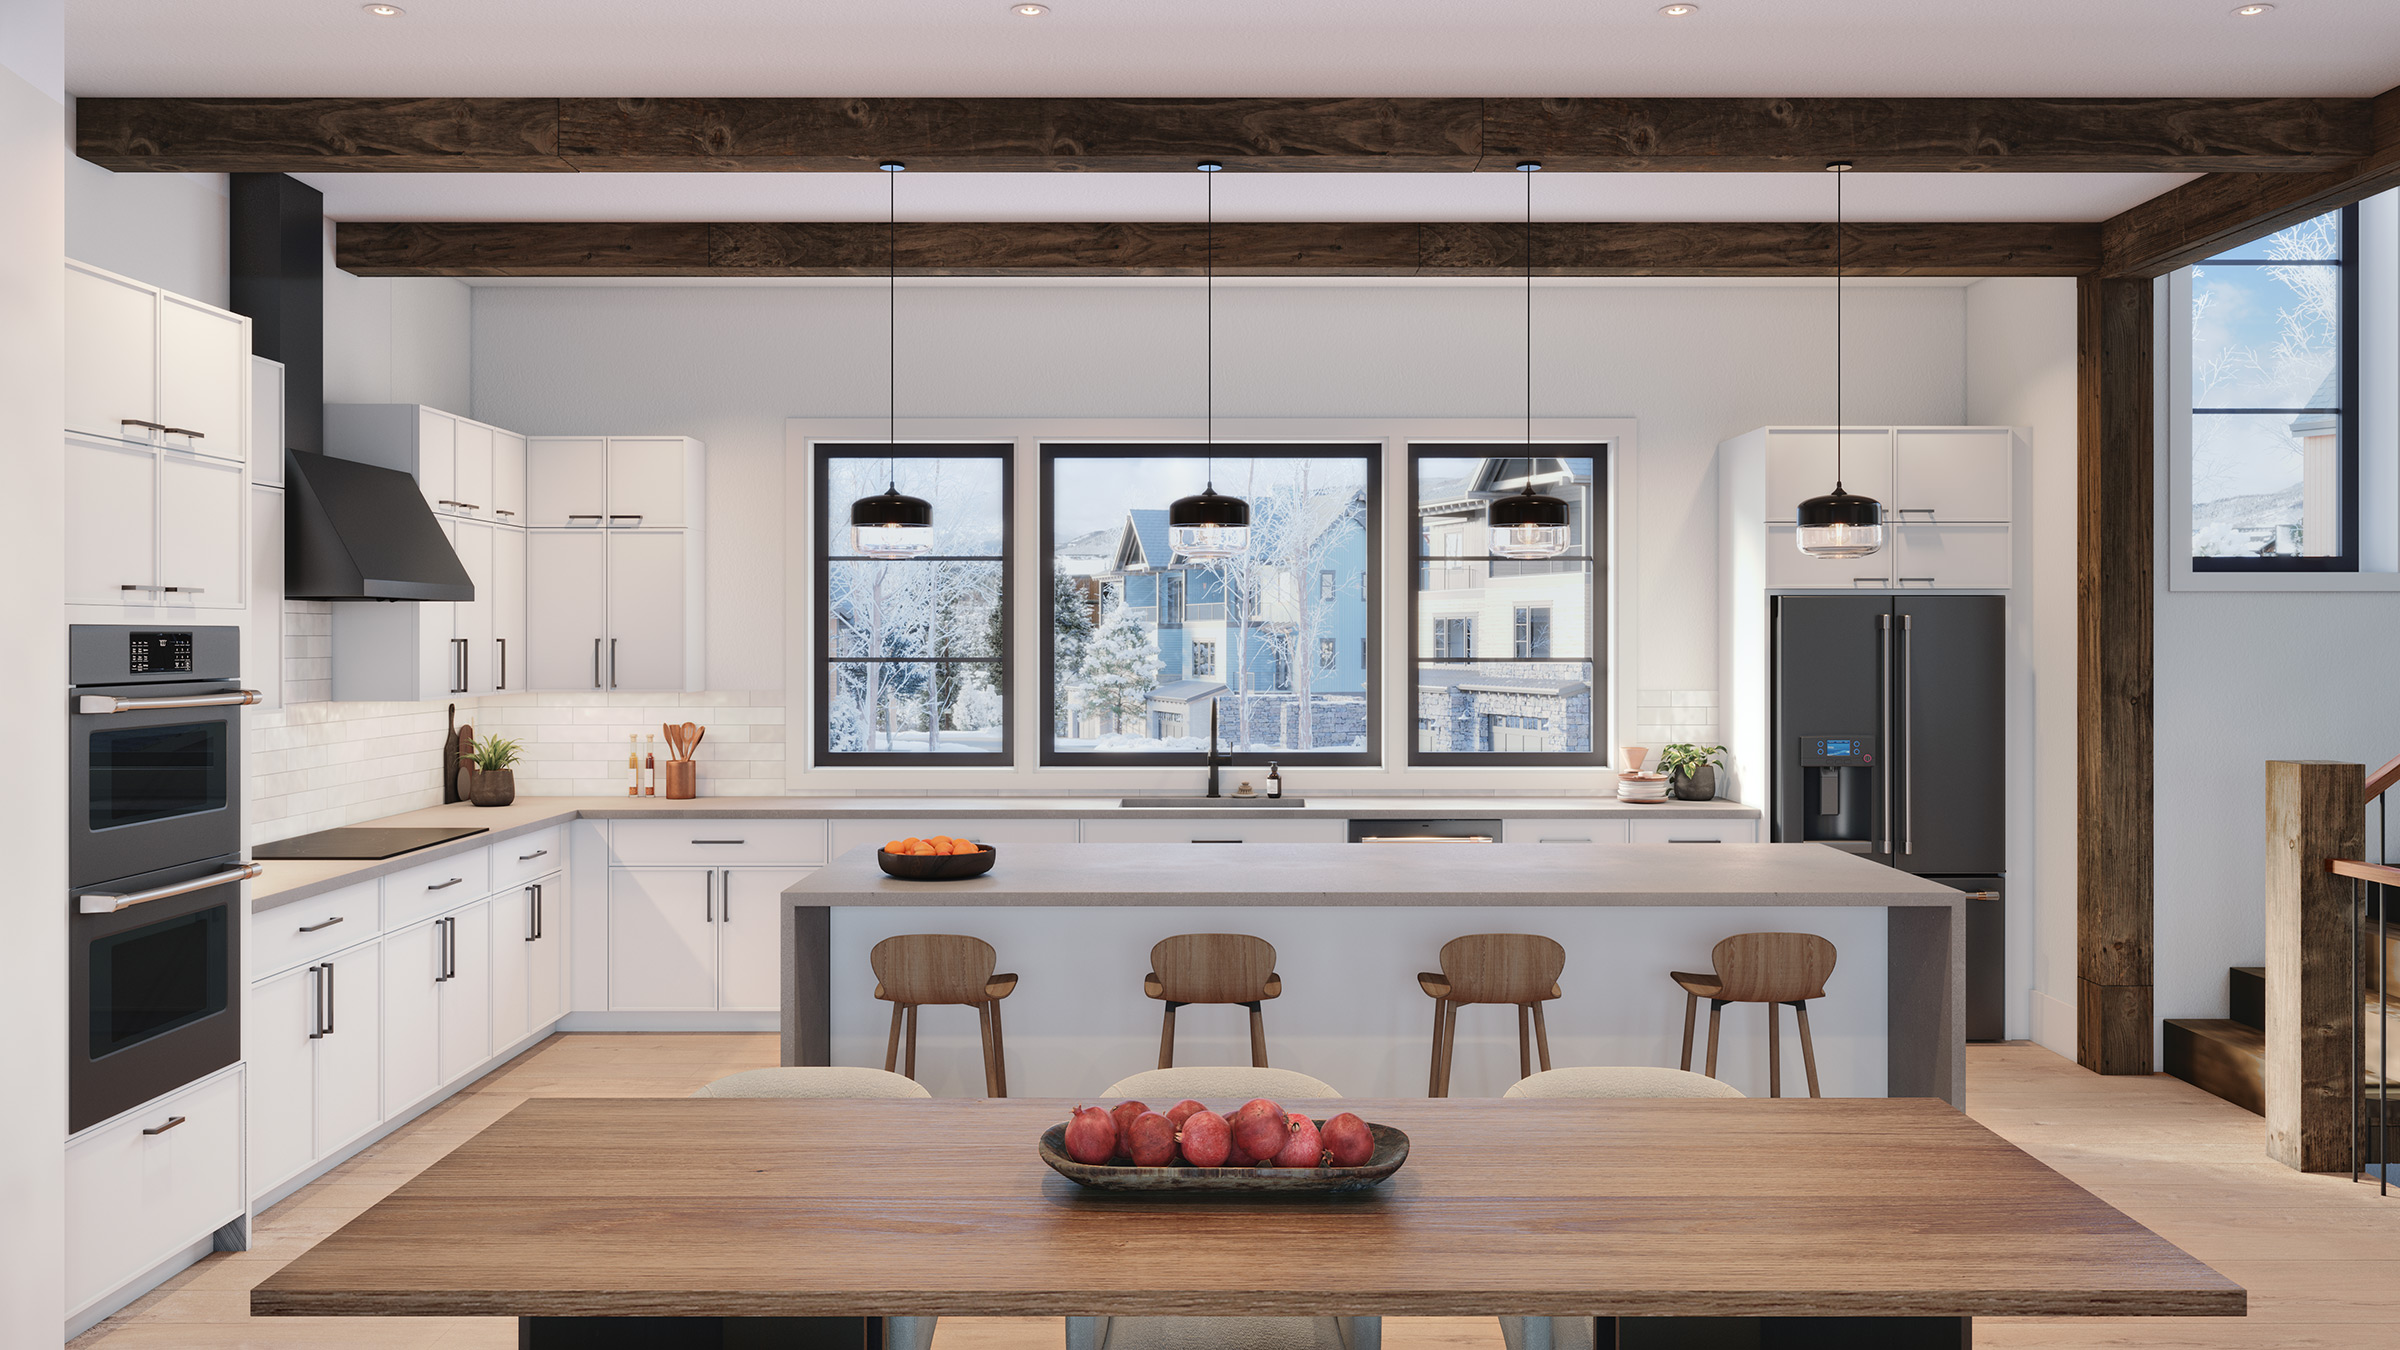 Spacious, gourmet kitchens feature stylish form, optimal function, and mountain views.